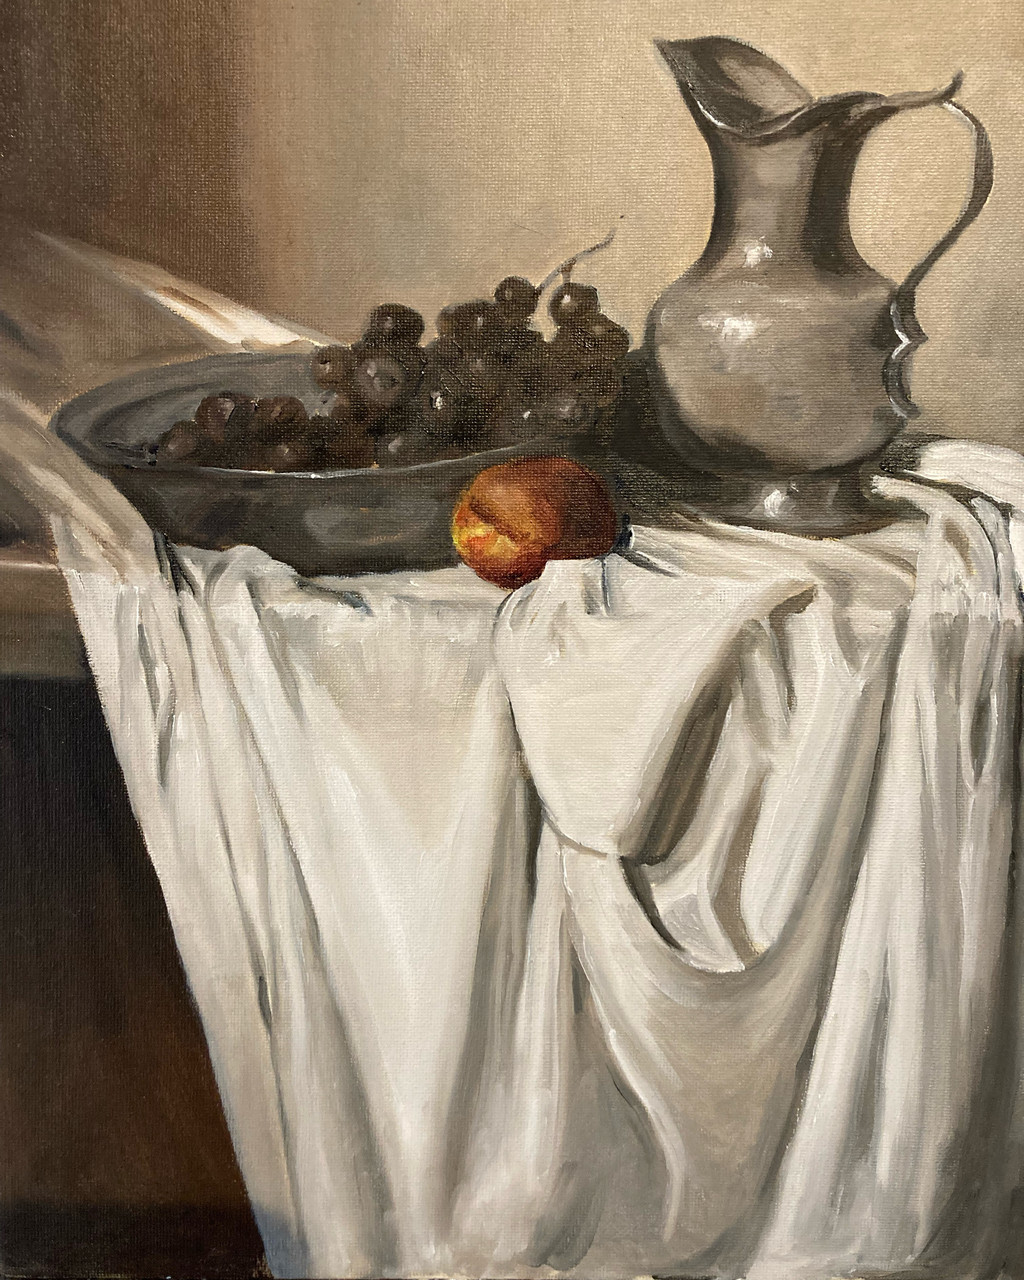 Grapes and Pewter Pitcher